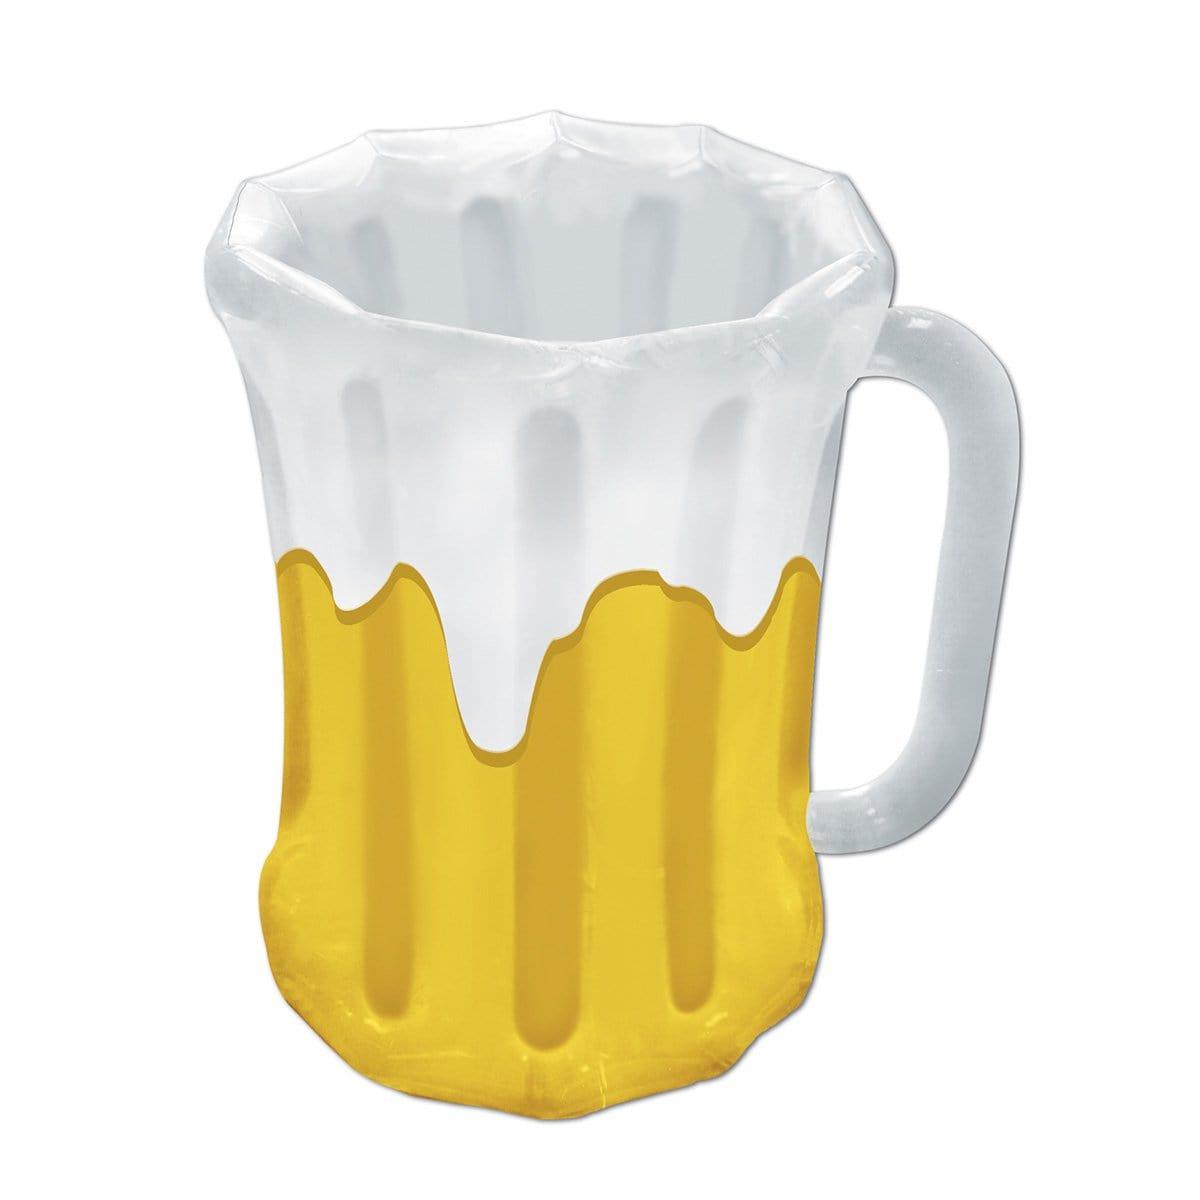 Buy Theme Party Oktoberfest Inflatable Mug Cooler, 27 Inches sold at Party Expert